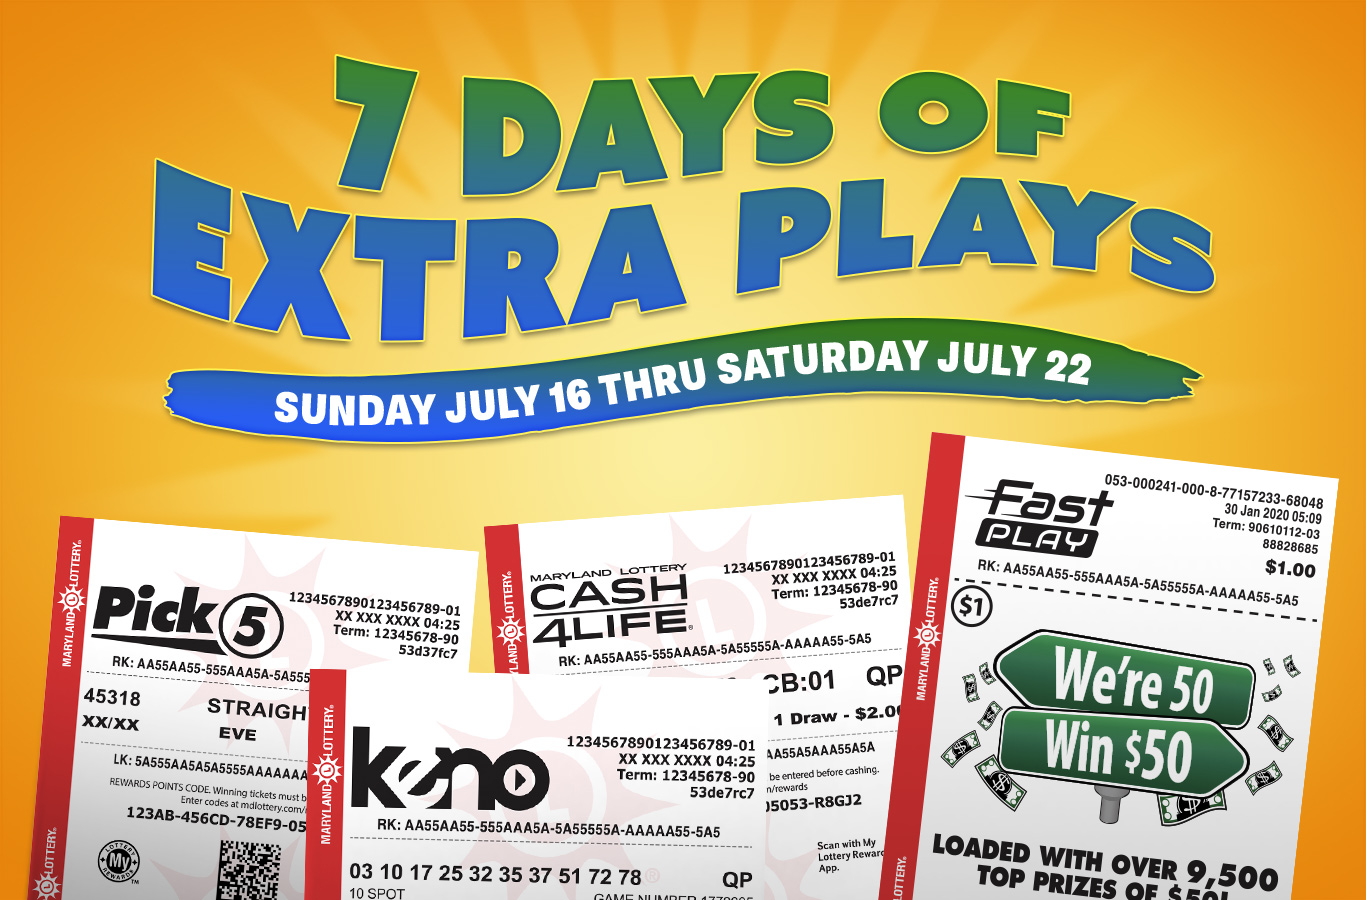 Happy Lottery Week! Play DRAW or FAST PLAY games from July 16th to July 22nd and you could win a FREE game!*